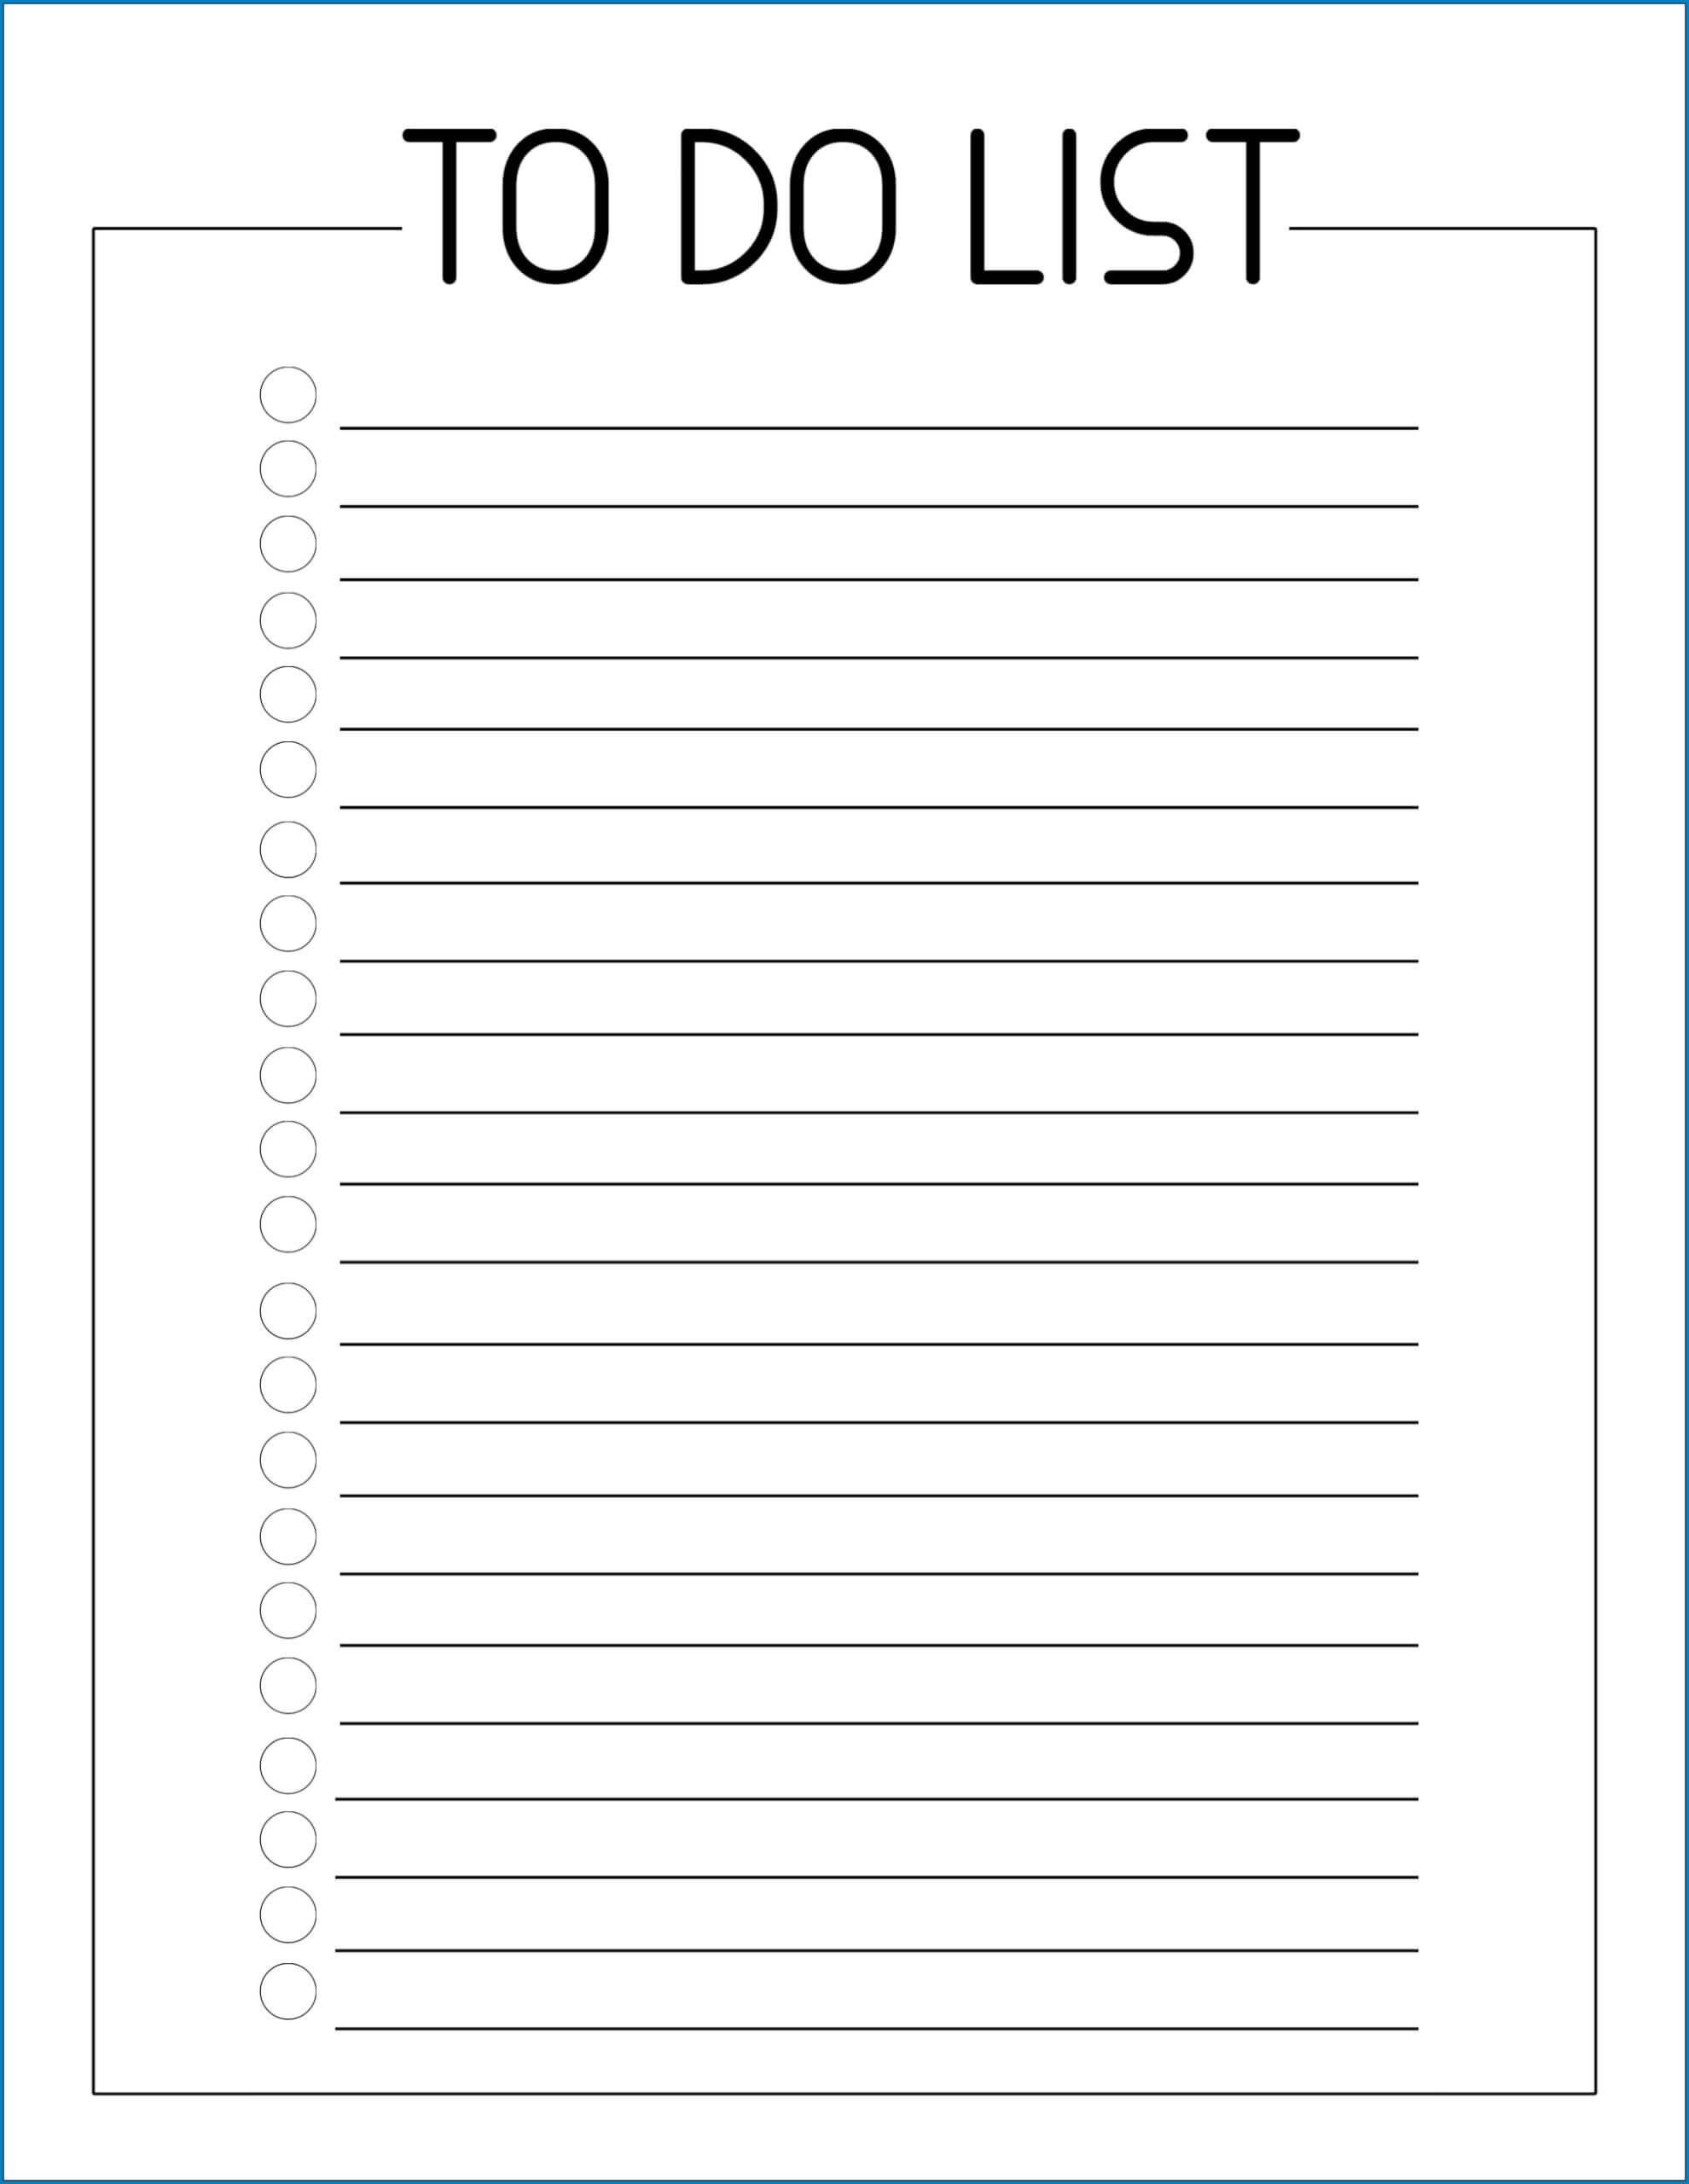  Free Printable To Do Checklist Template Templateral In Blank Checklist Template Word Best